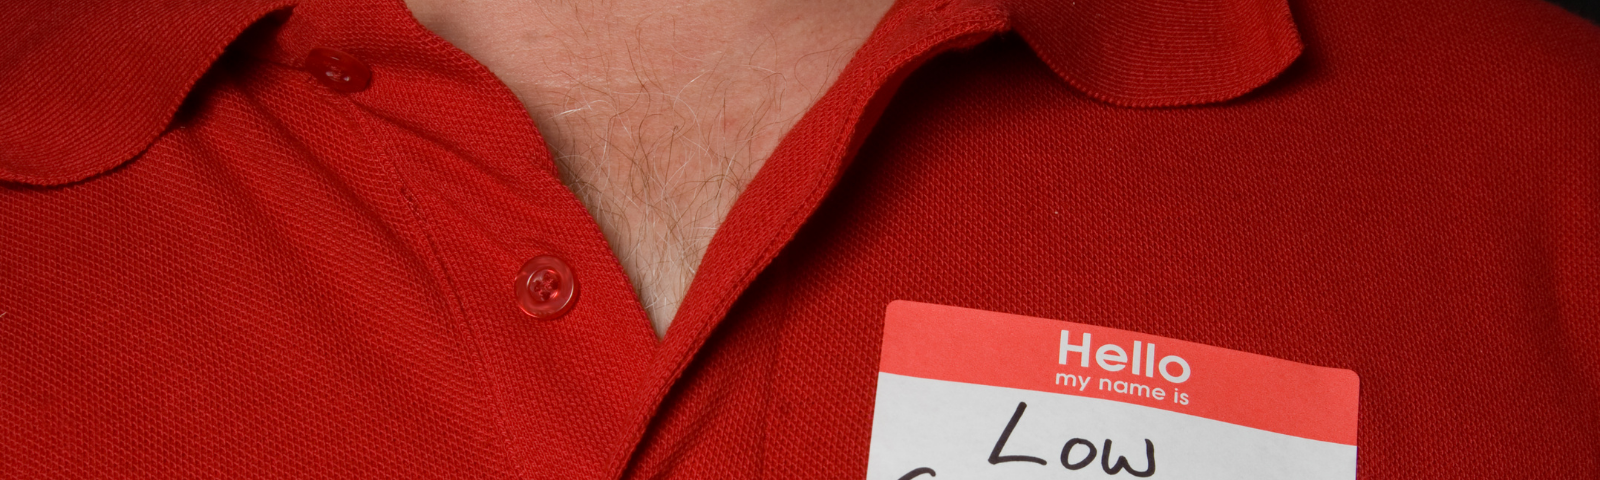 A person wearing a red shirt has a name tag that reads, “Hello my name is Low Self Esteem”.